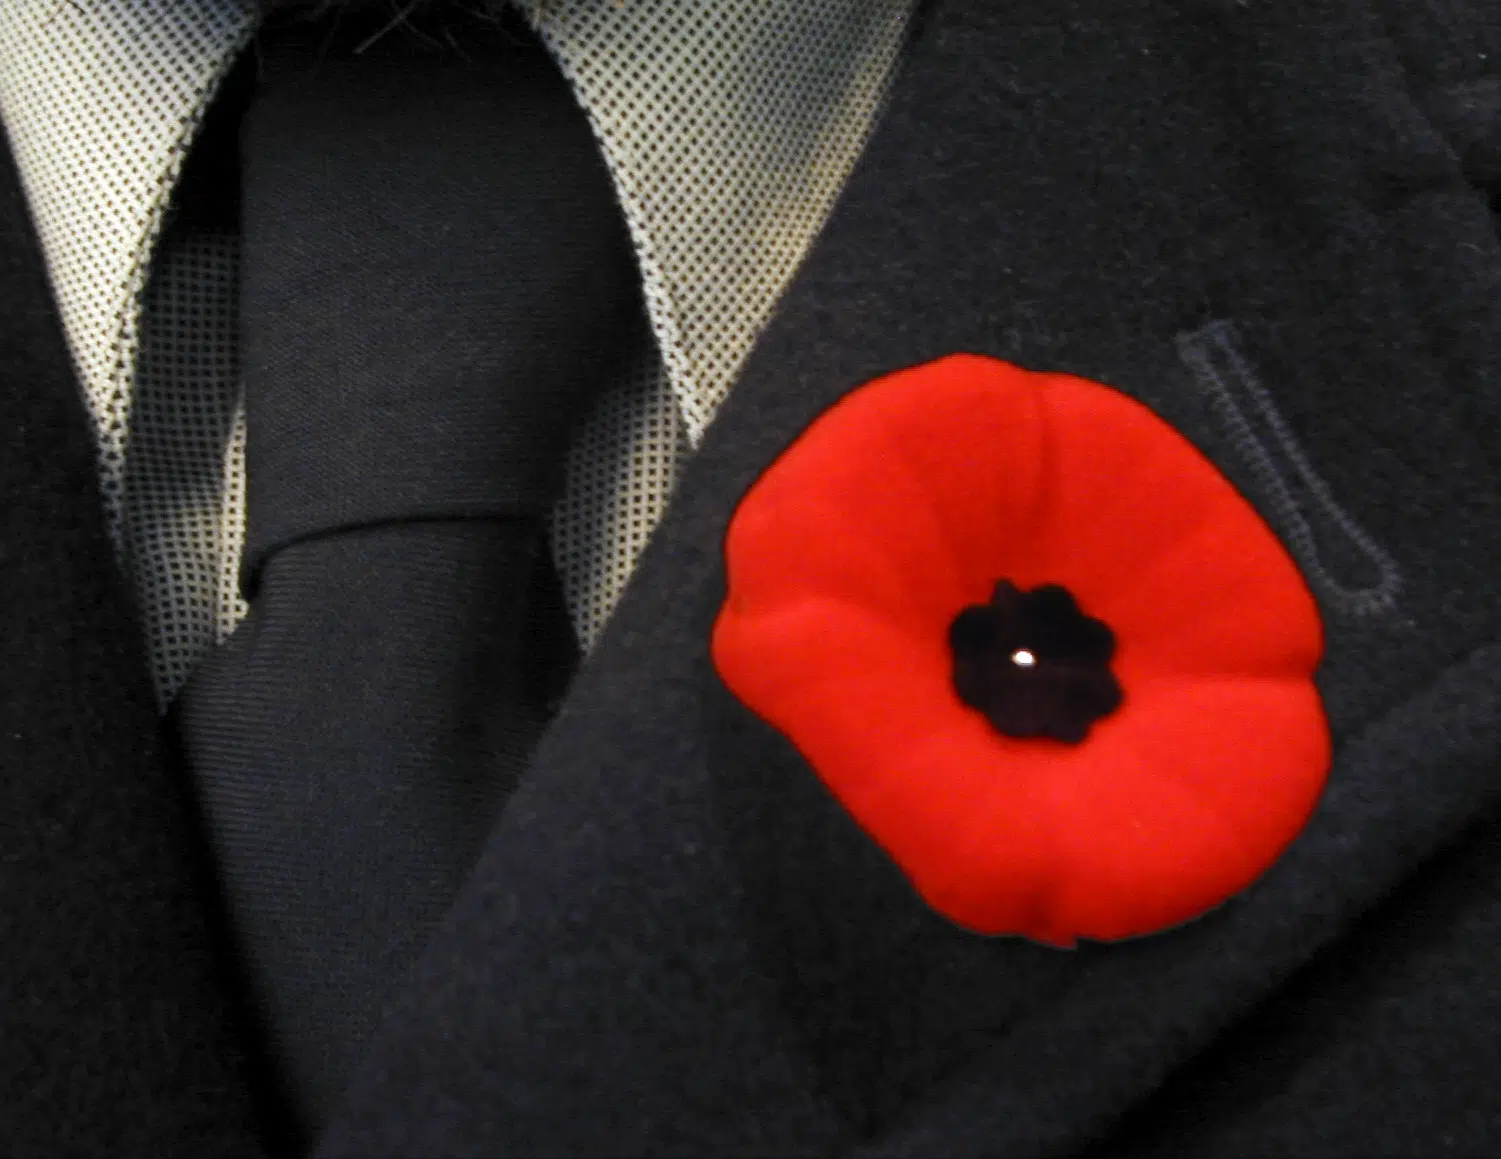 Lest we forget, another way to remember war veterans in Kamloops